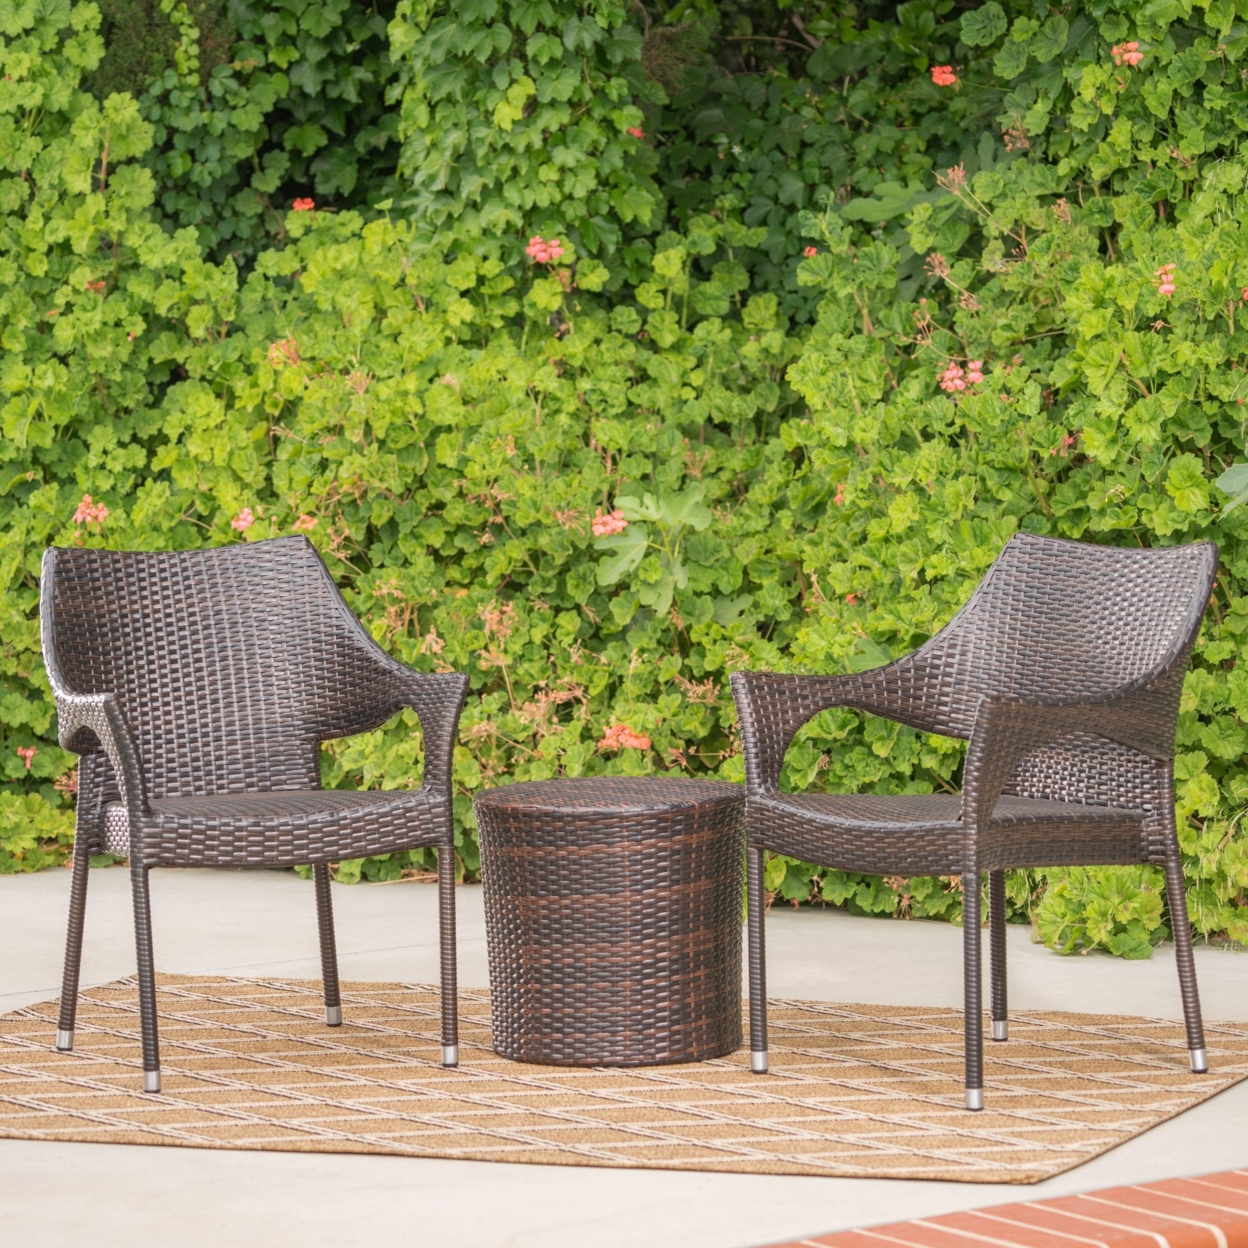 Alfheimr Outdoor 3 Piece Multi-brown Wicker Stacking Chair Chat Set - Cylindrical Table